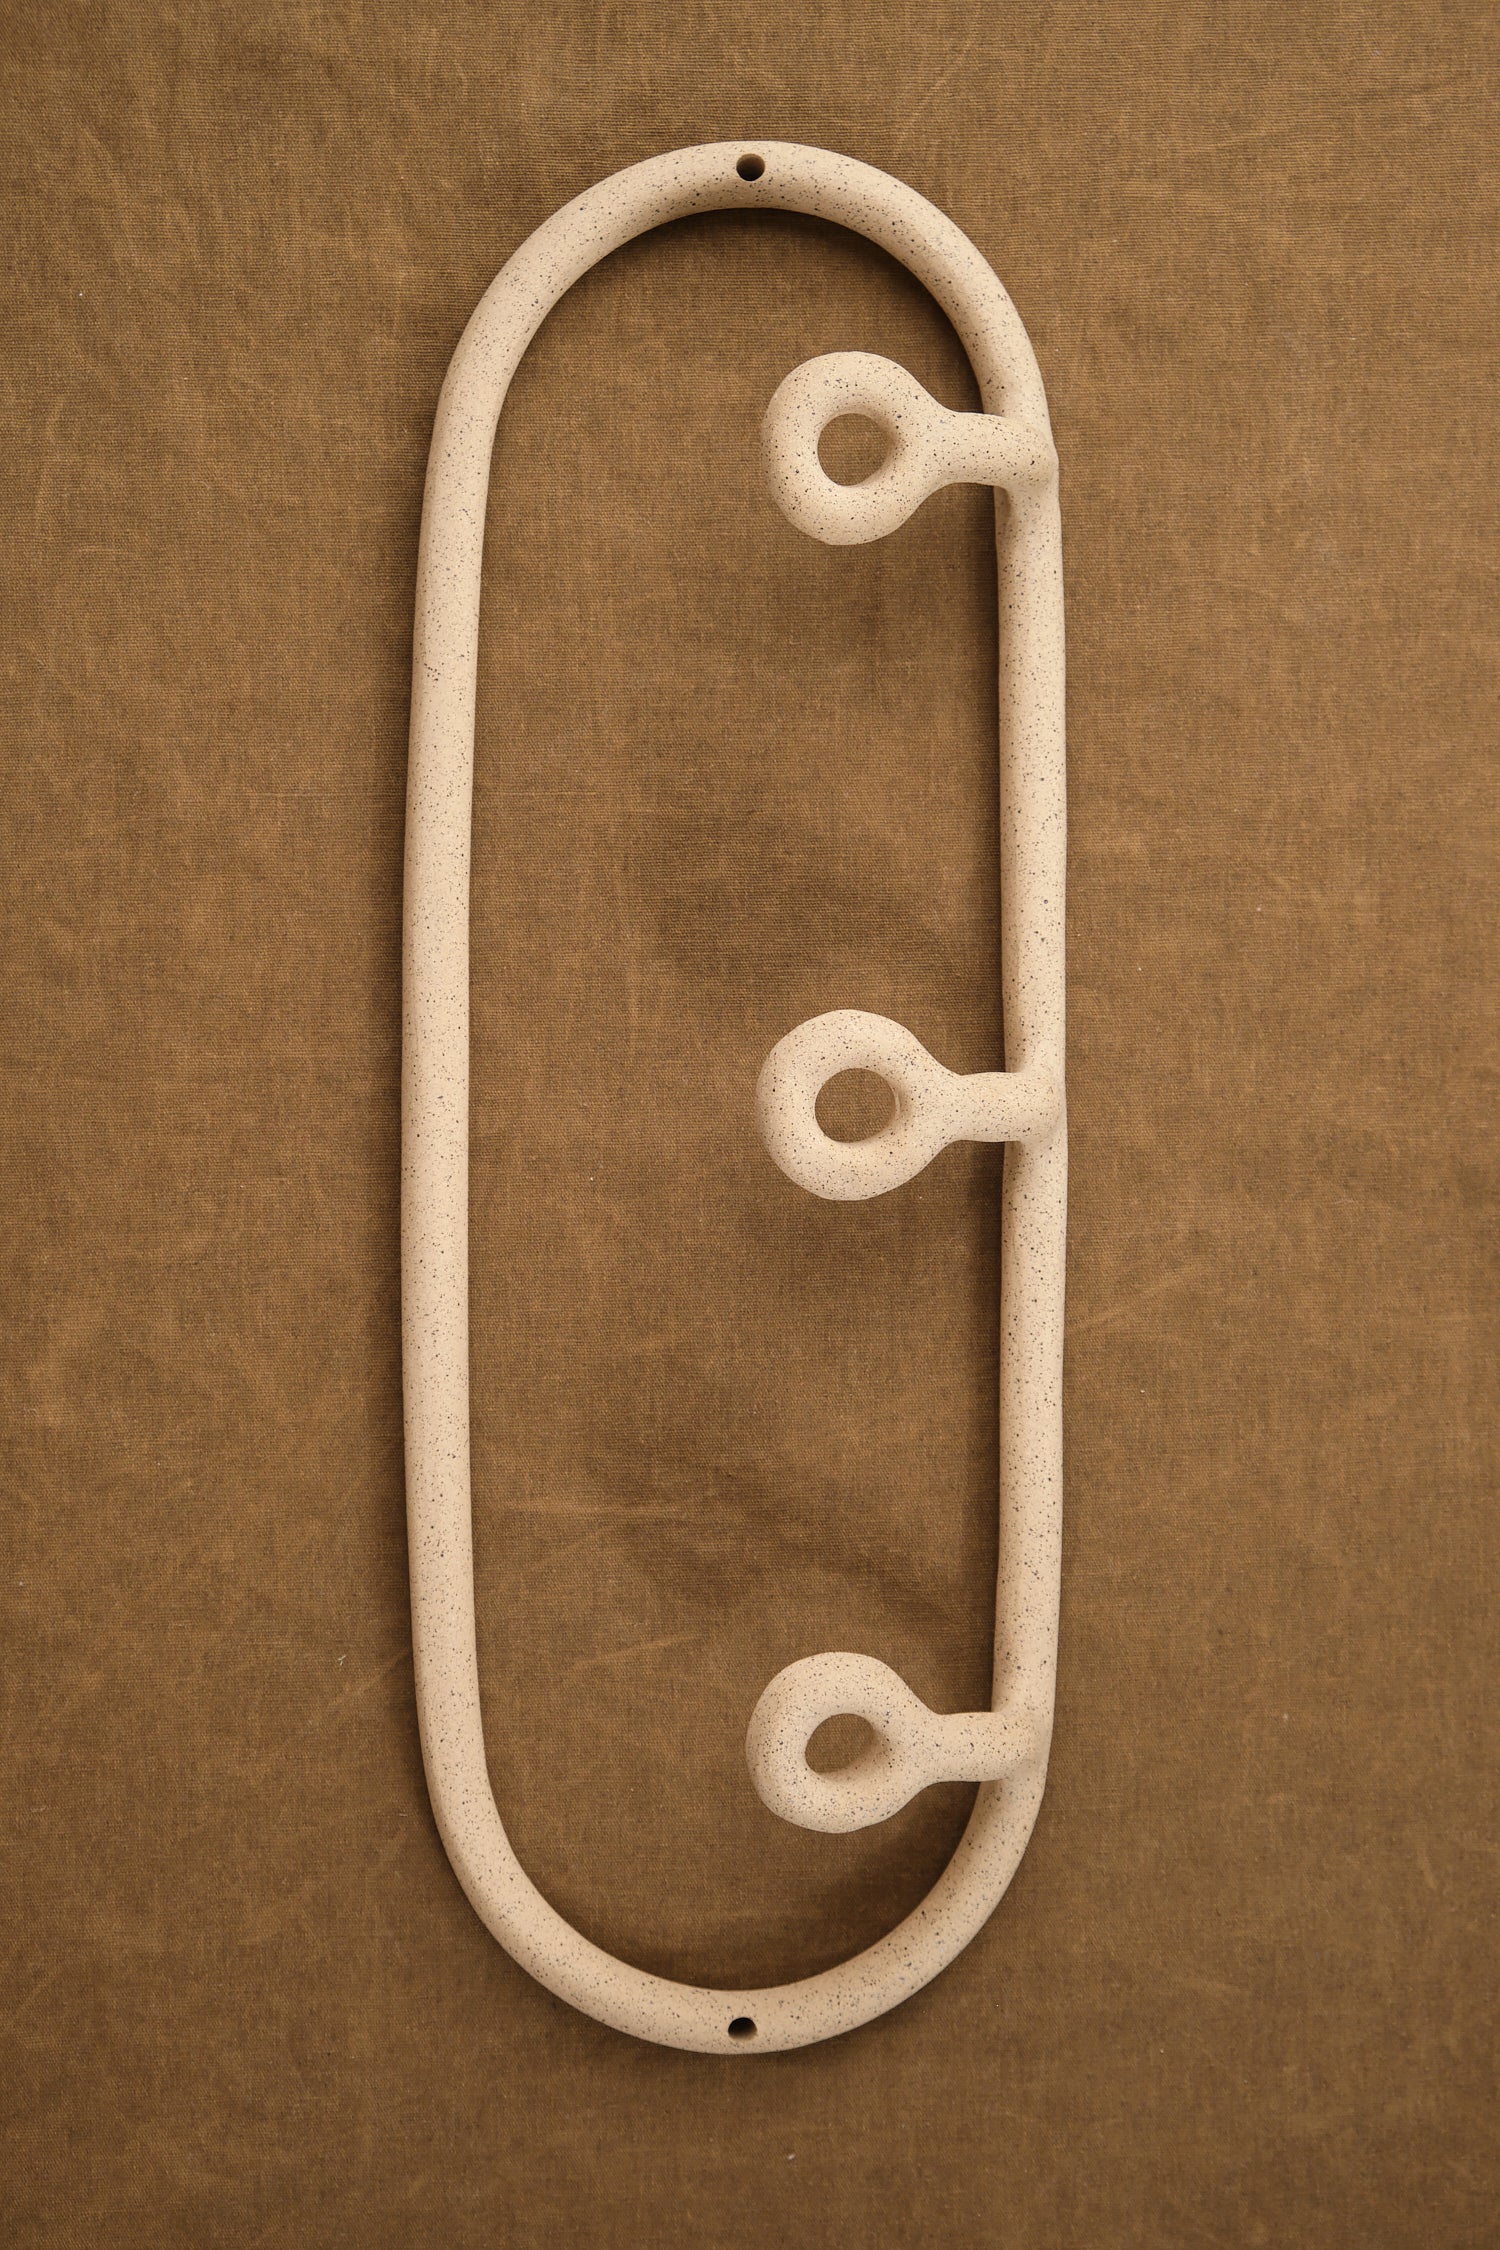 Top of Trio Coat Rack with O Hooks